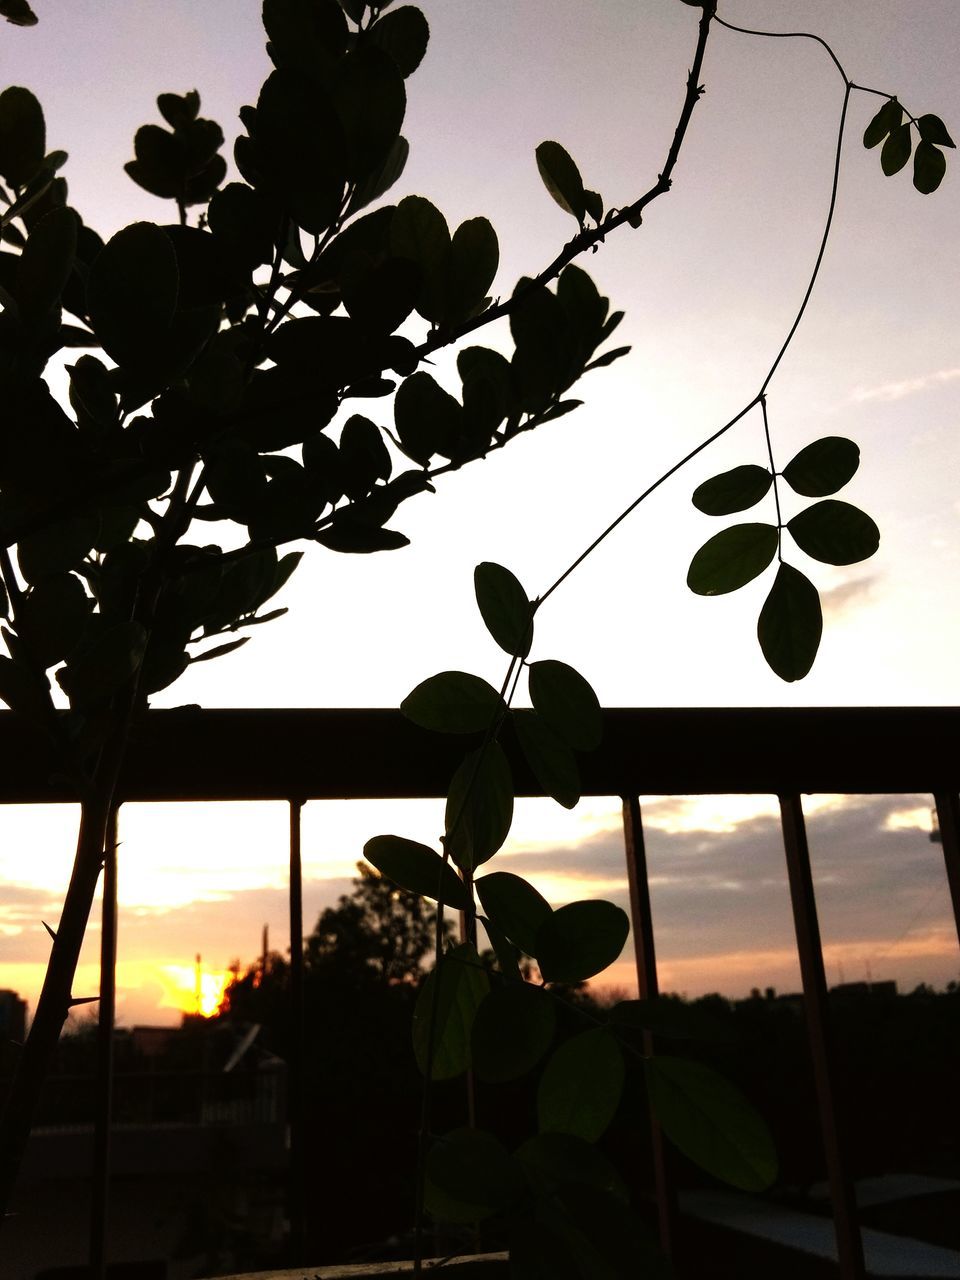 sky, silhouette, plant, sunset, tree, leaf, nature, plant part, growth, outdoors, no people, cloud - sky, focus on foreground, day, food and drink, close-up, hanging, food, branch, beauty in nature